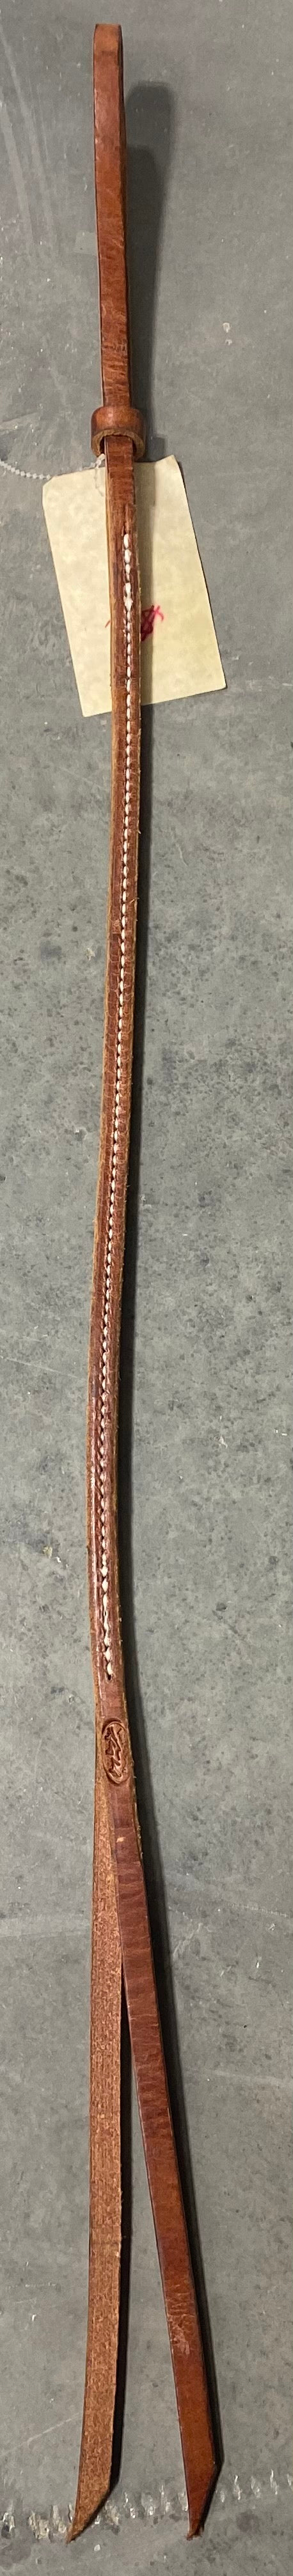 Jerry Beagley Leather Whip